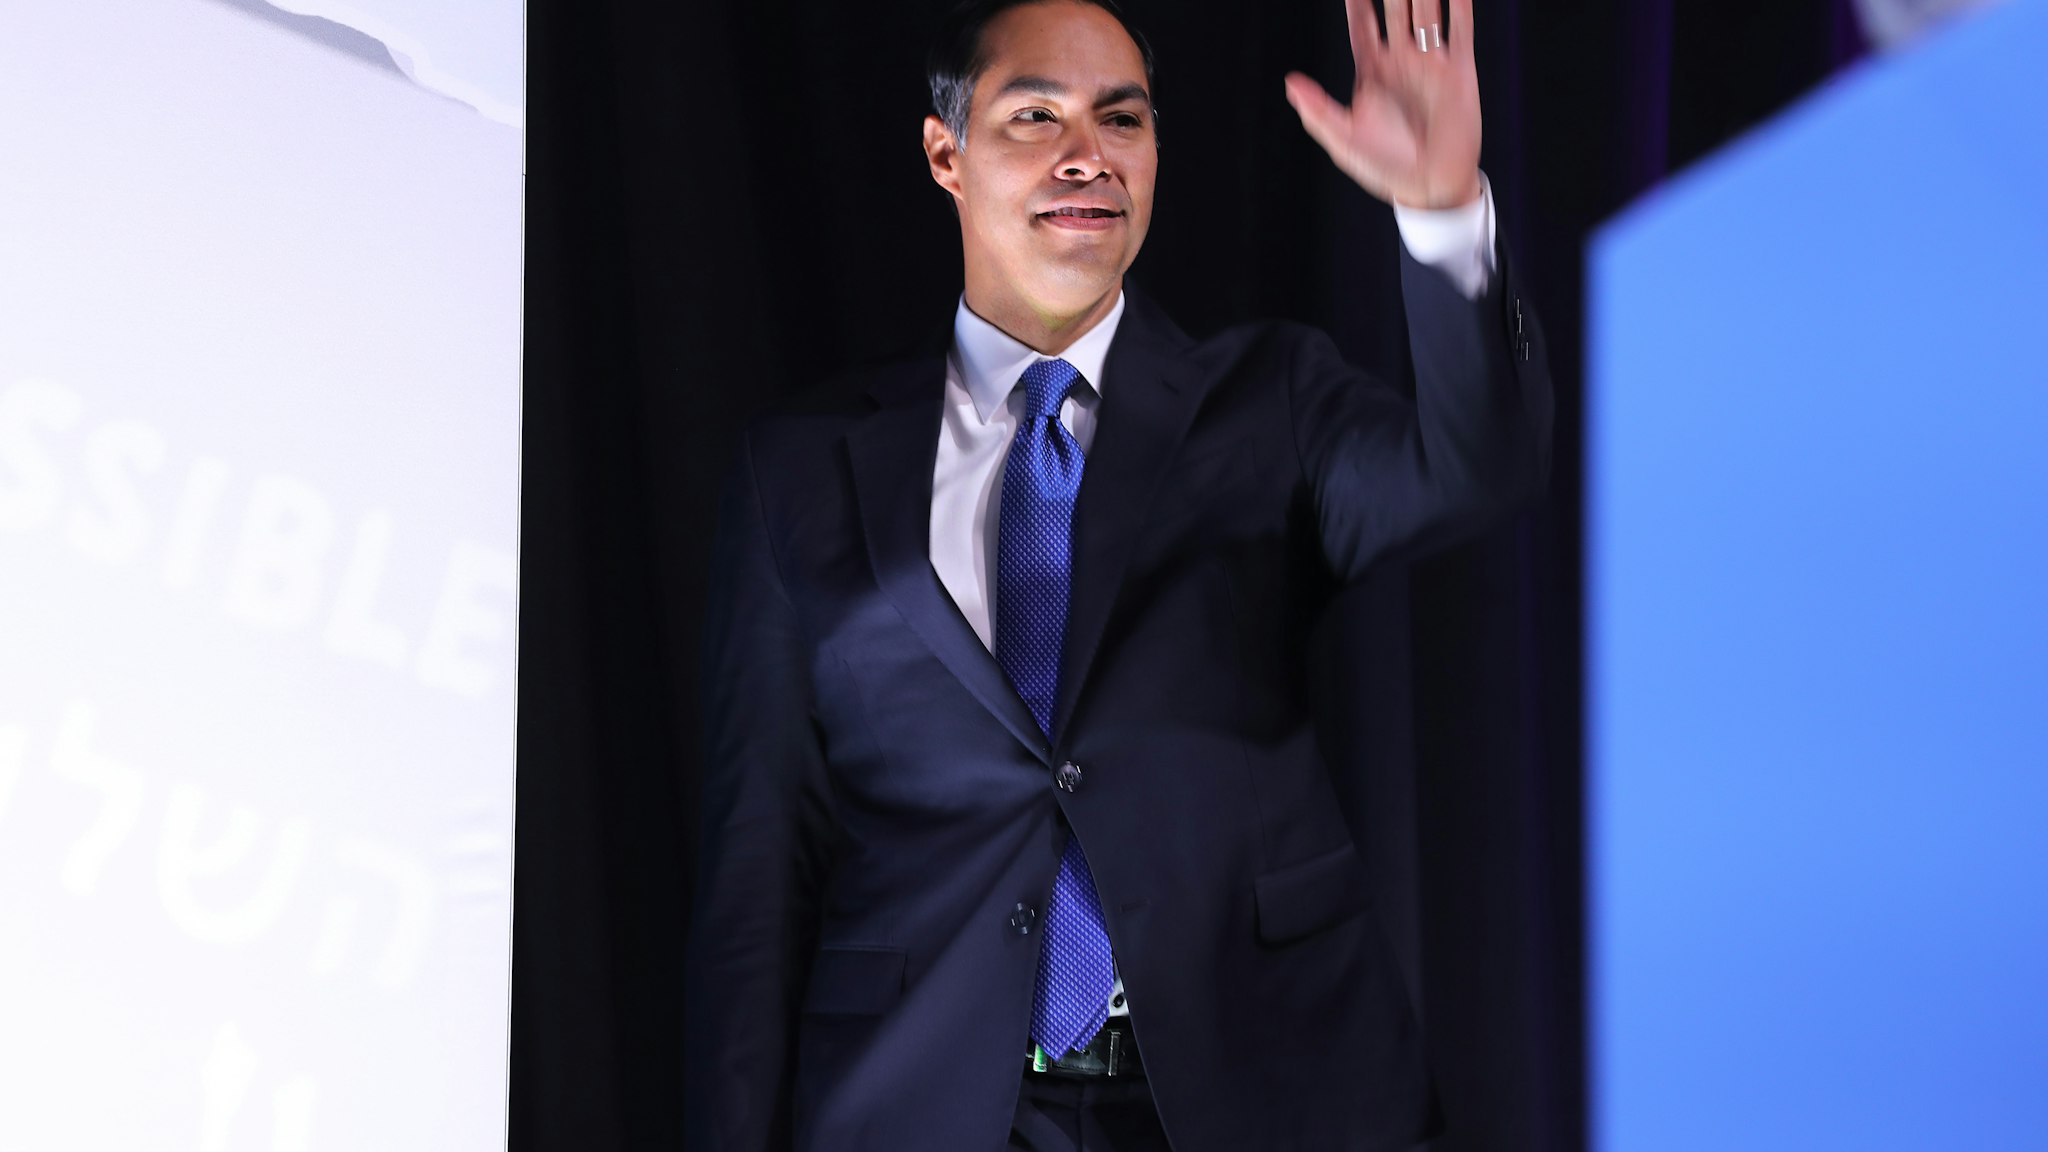 WASHINGTON, DC - OCTOBER 28: Democratic presidential candidate and former housing secretary Julian Castro takes the stage during the J Street National Conference at the Walter E. Washington Convention Center October 28, 2019 in Washington, DC. Castro and three other presidential candidates were interviewed about Israel and U.S. foreign policy during the conference hosted by J Street, a political action committee that supports two-state solution to the Israeli-Palestinian conflict. (Photo by Chip Somodevilla/Getty Images)